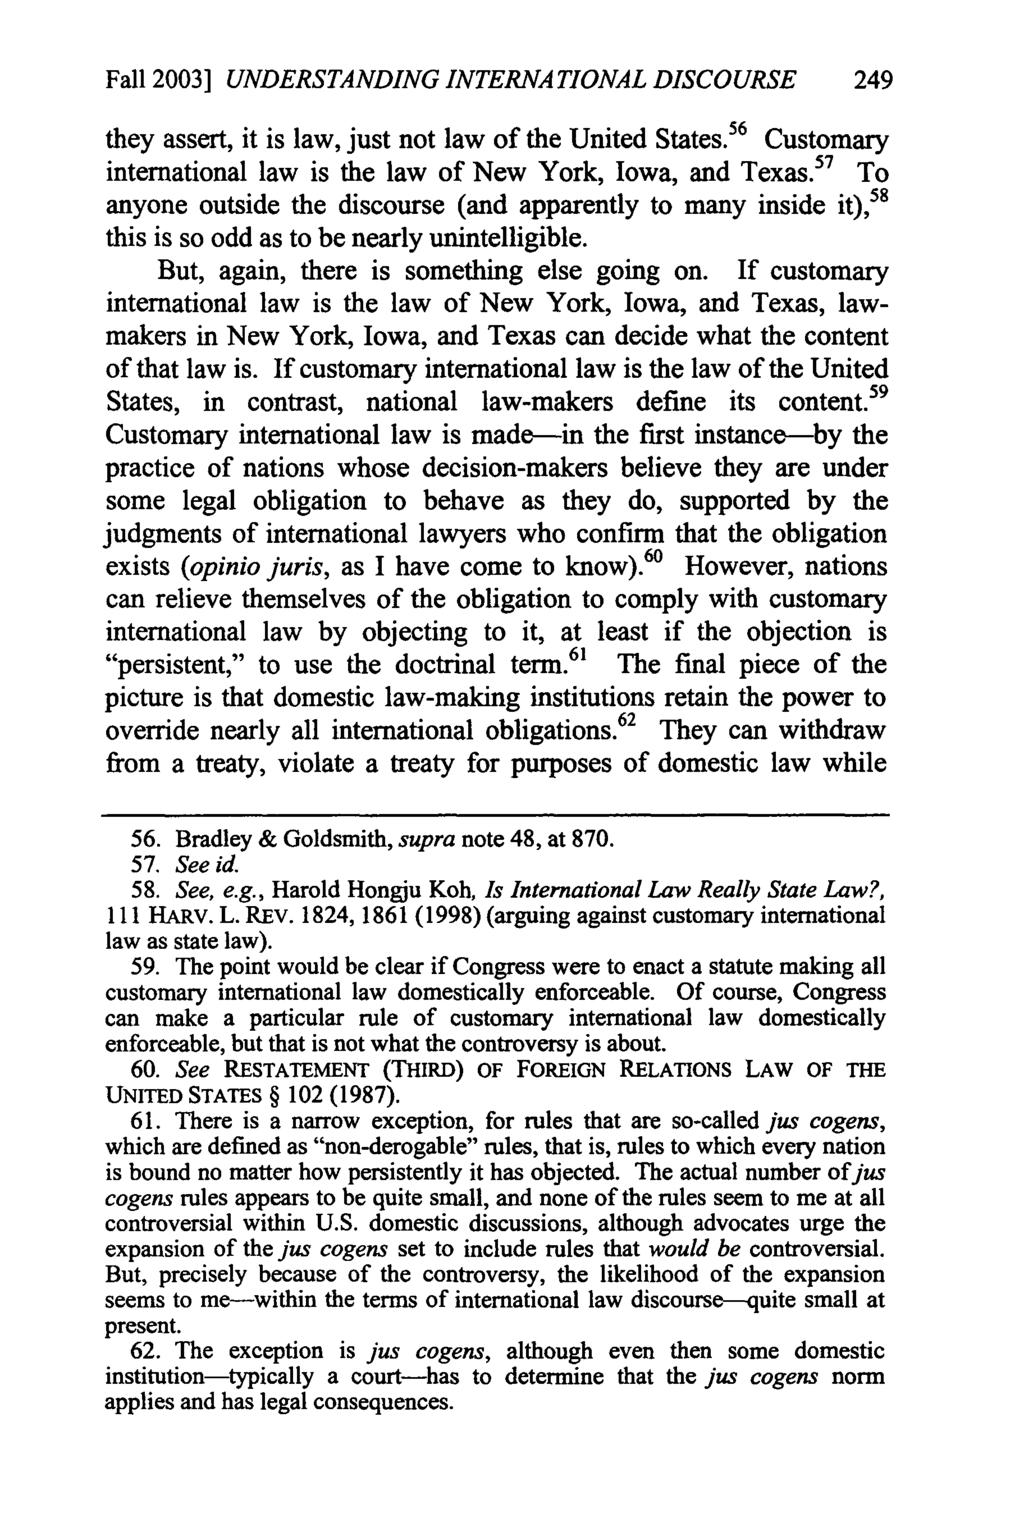 Fall 2003] UNDERSTANDING INTERNATIONAL DISCOURSE 249 they assert, it is law, just not law of the United States. 5 6 Customary international law is the law of New York, Iowa, and Texas.